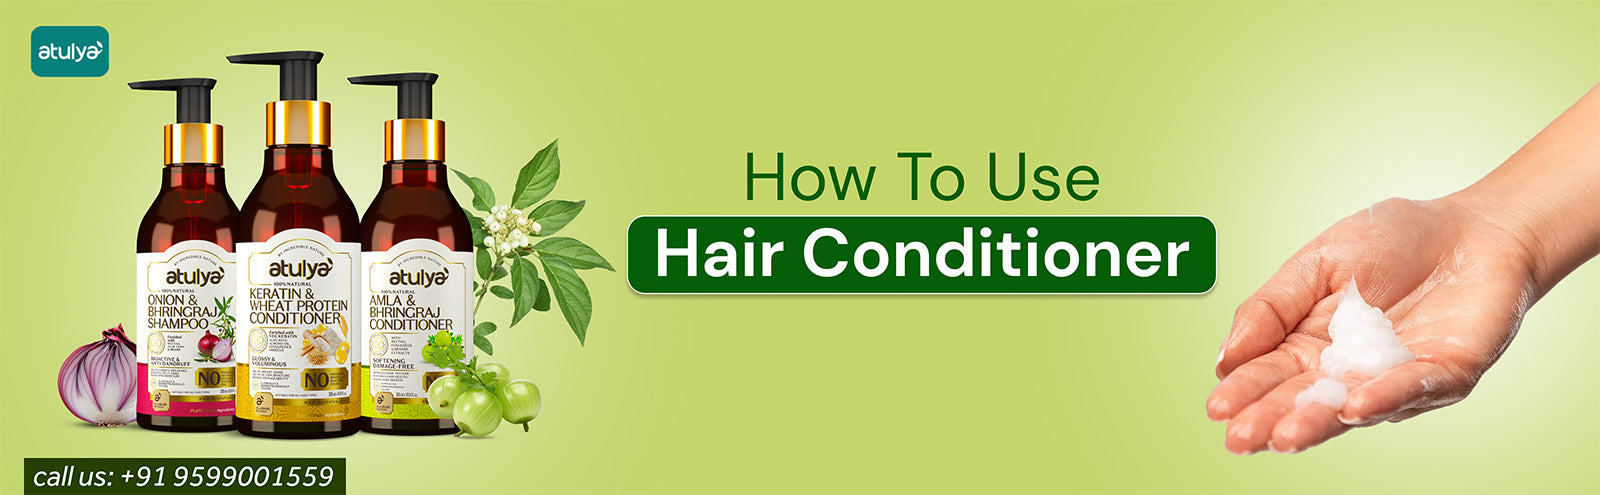 How to use hair conditioner